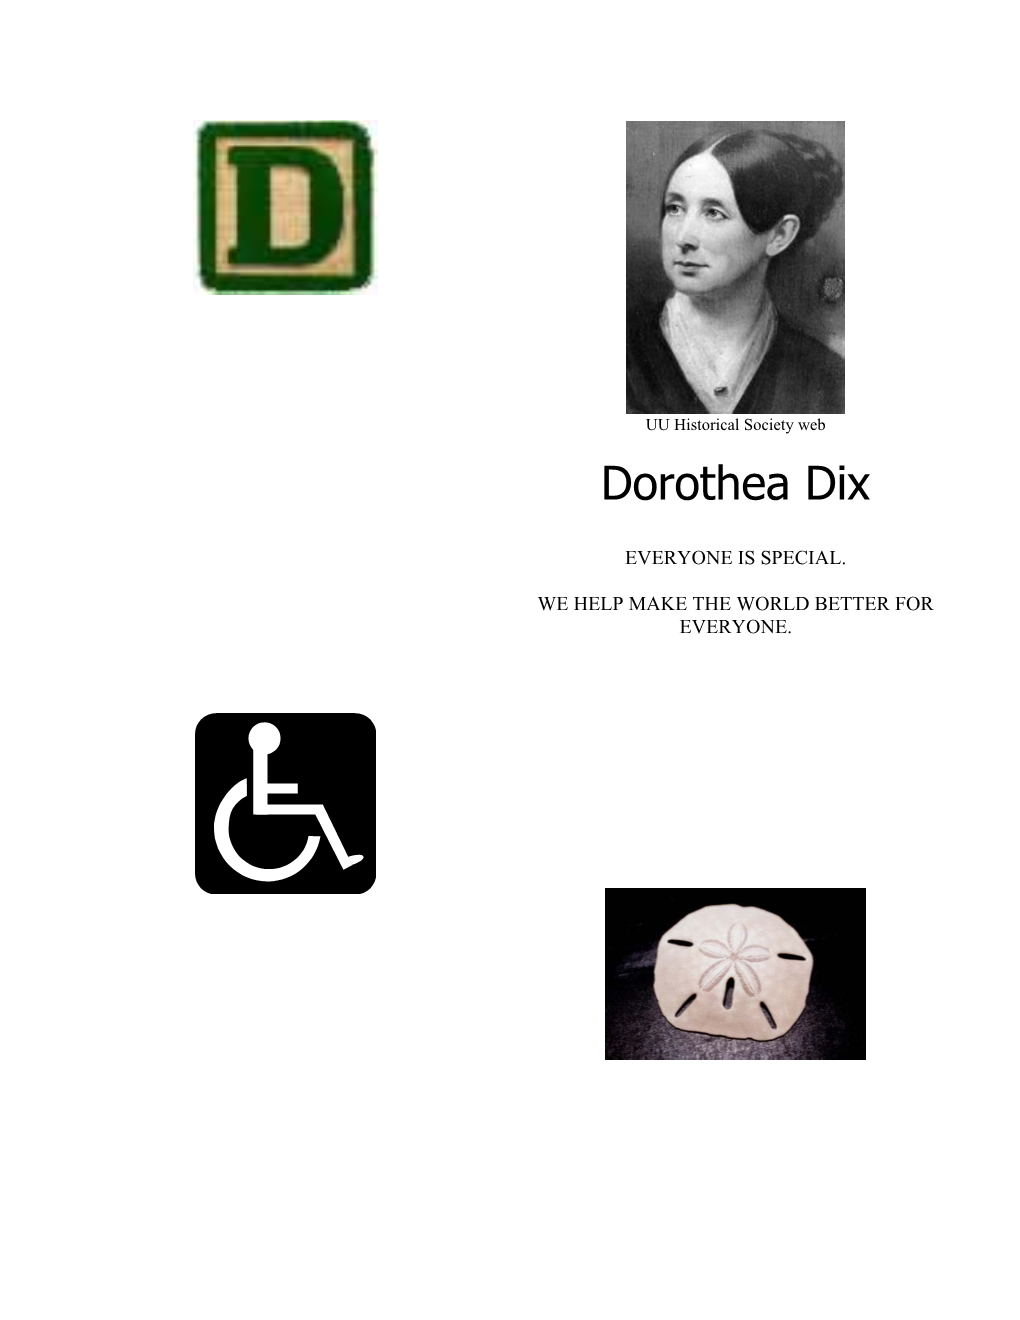 FOCUS: Letter D Introduces Dorothea Dix And Working With People With Varying Abilities